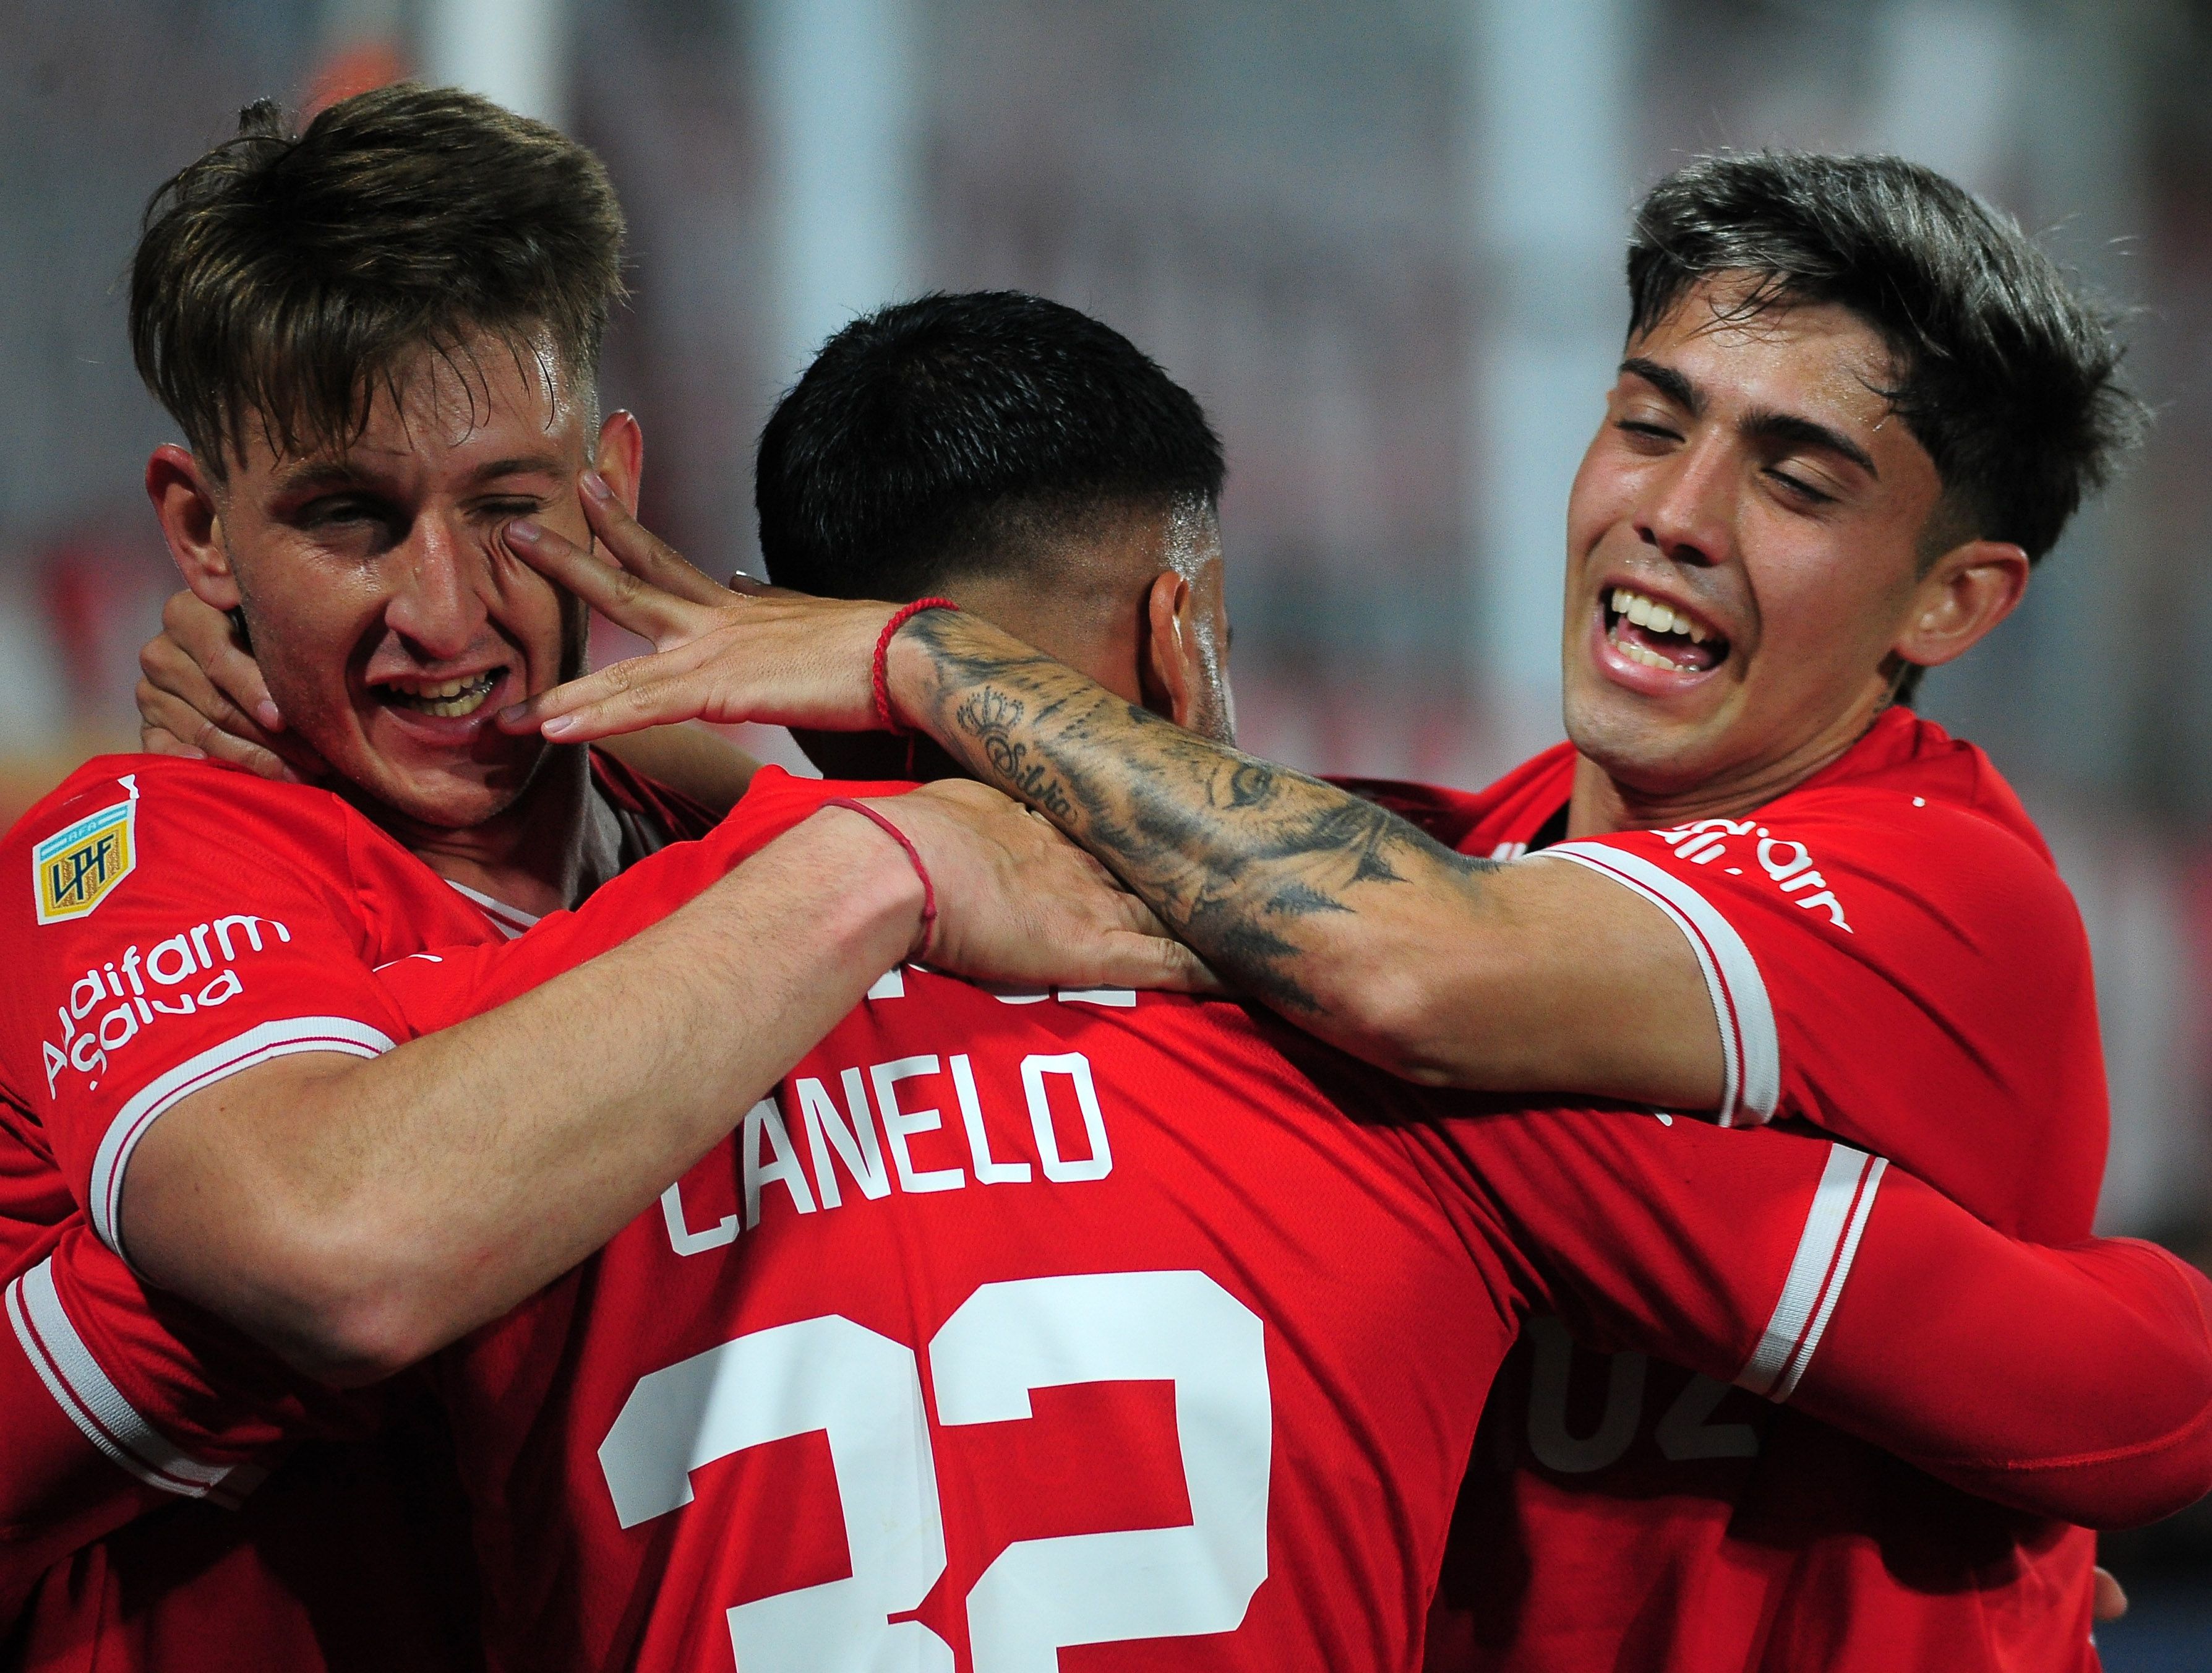 Independiente and Canelo's celebration against Huracán.  (Photobaires).